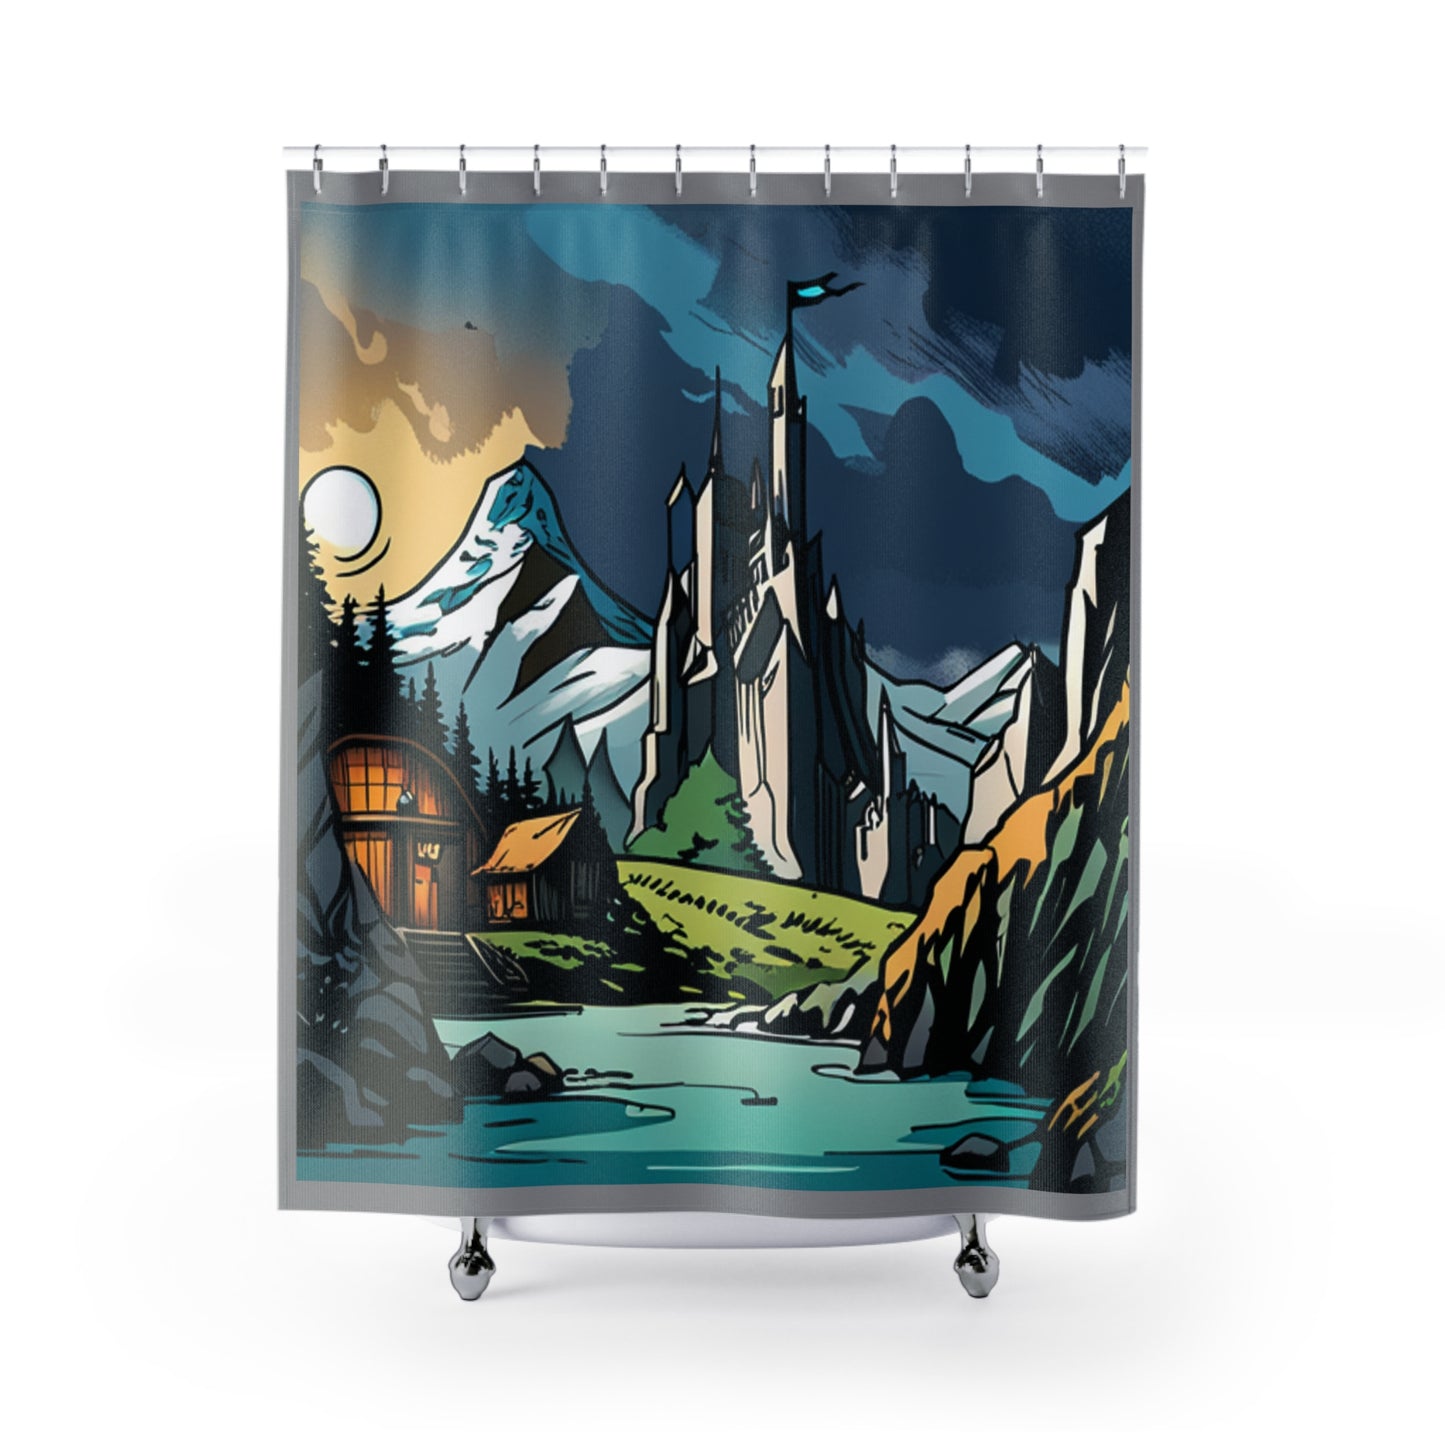 Life in the Shire: A Scenic Shower Curtain for a Cozy Retreat